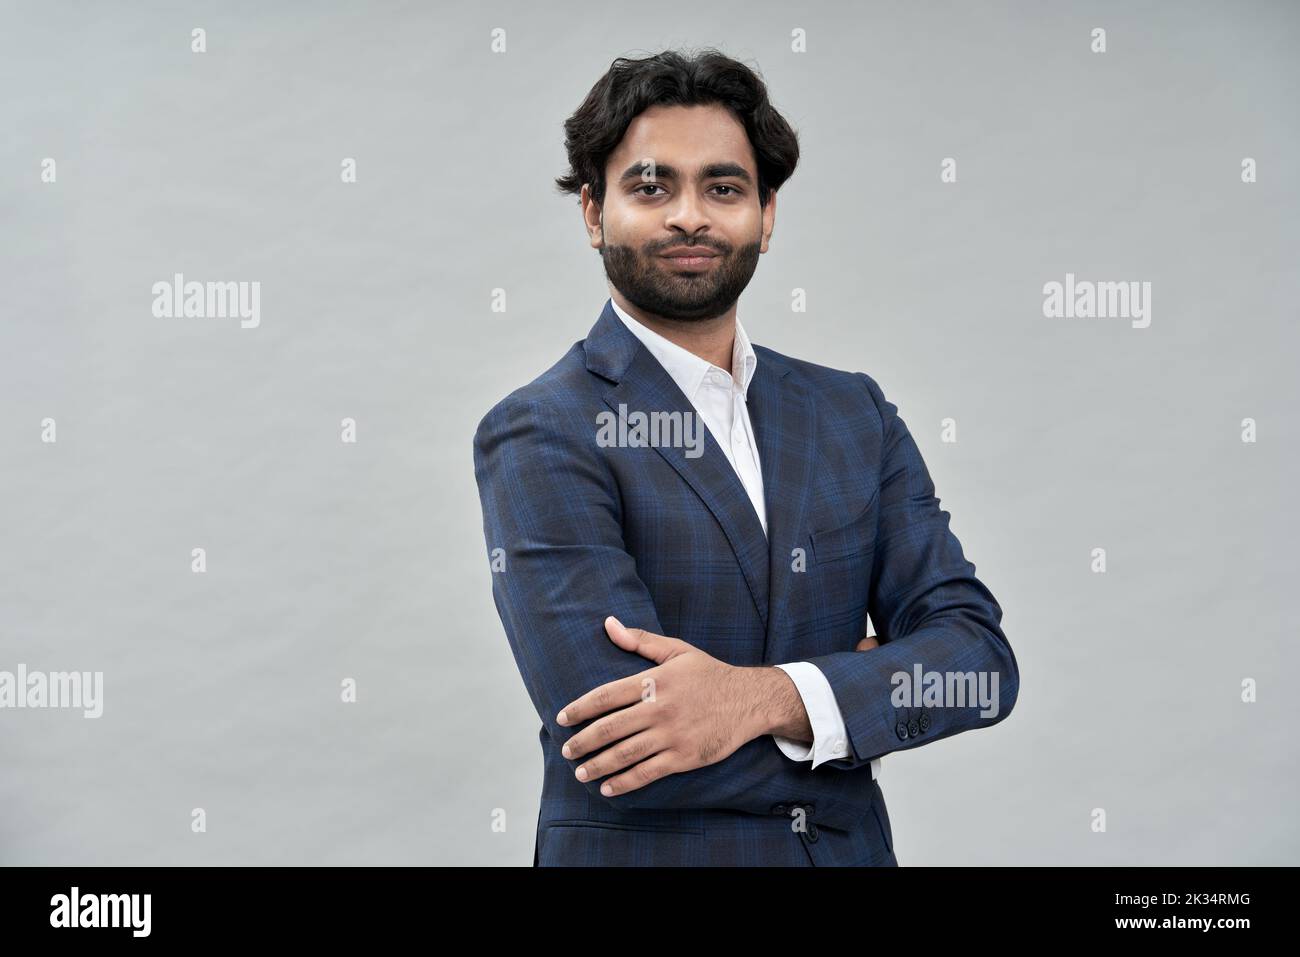 Proud successful young indian arab business man wearing suit, portrait Stock Photo